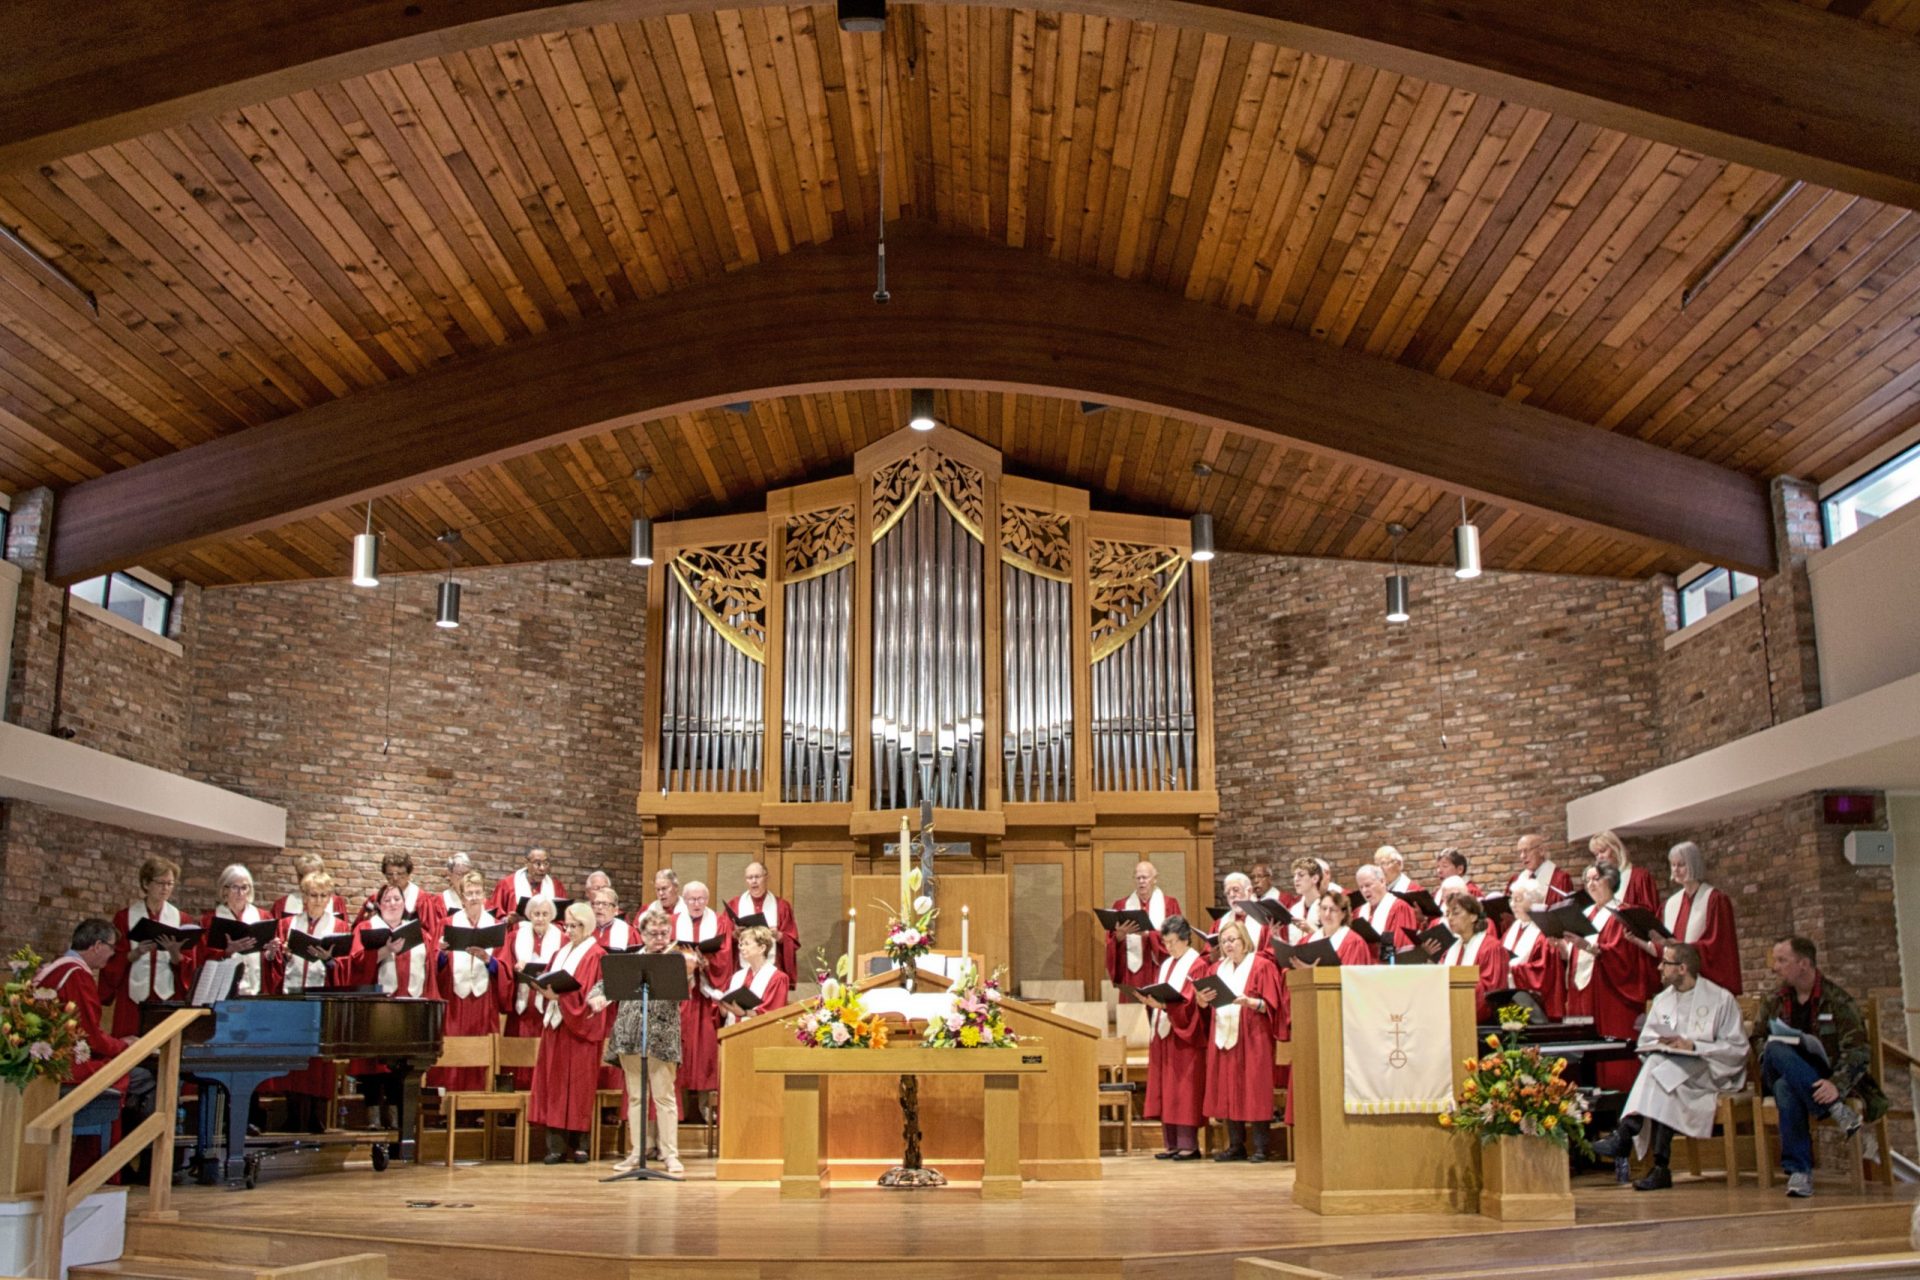 The First Congregational Choir with Sarah playing violin